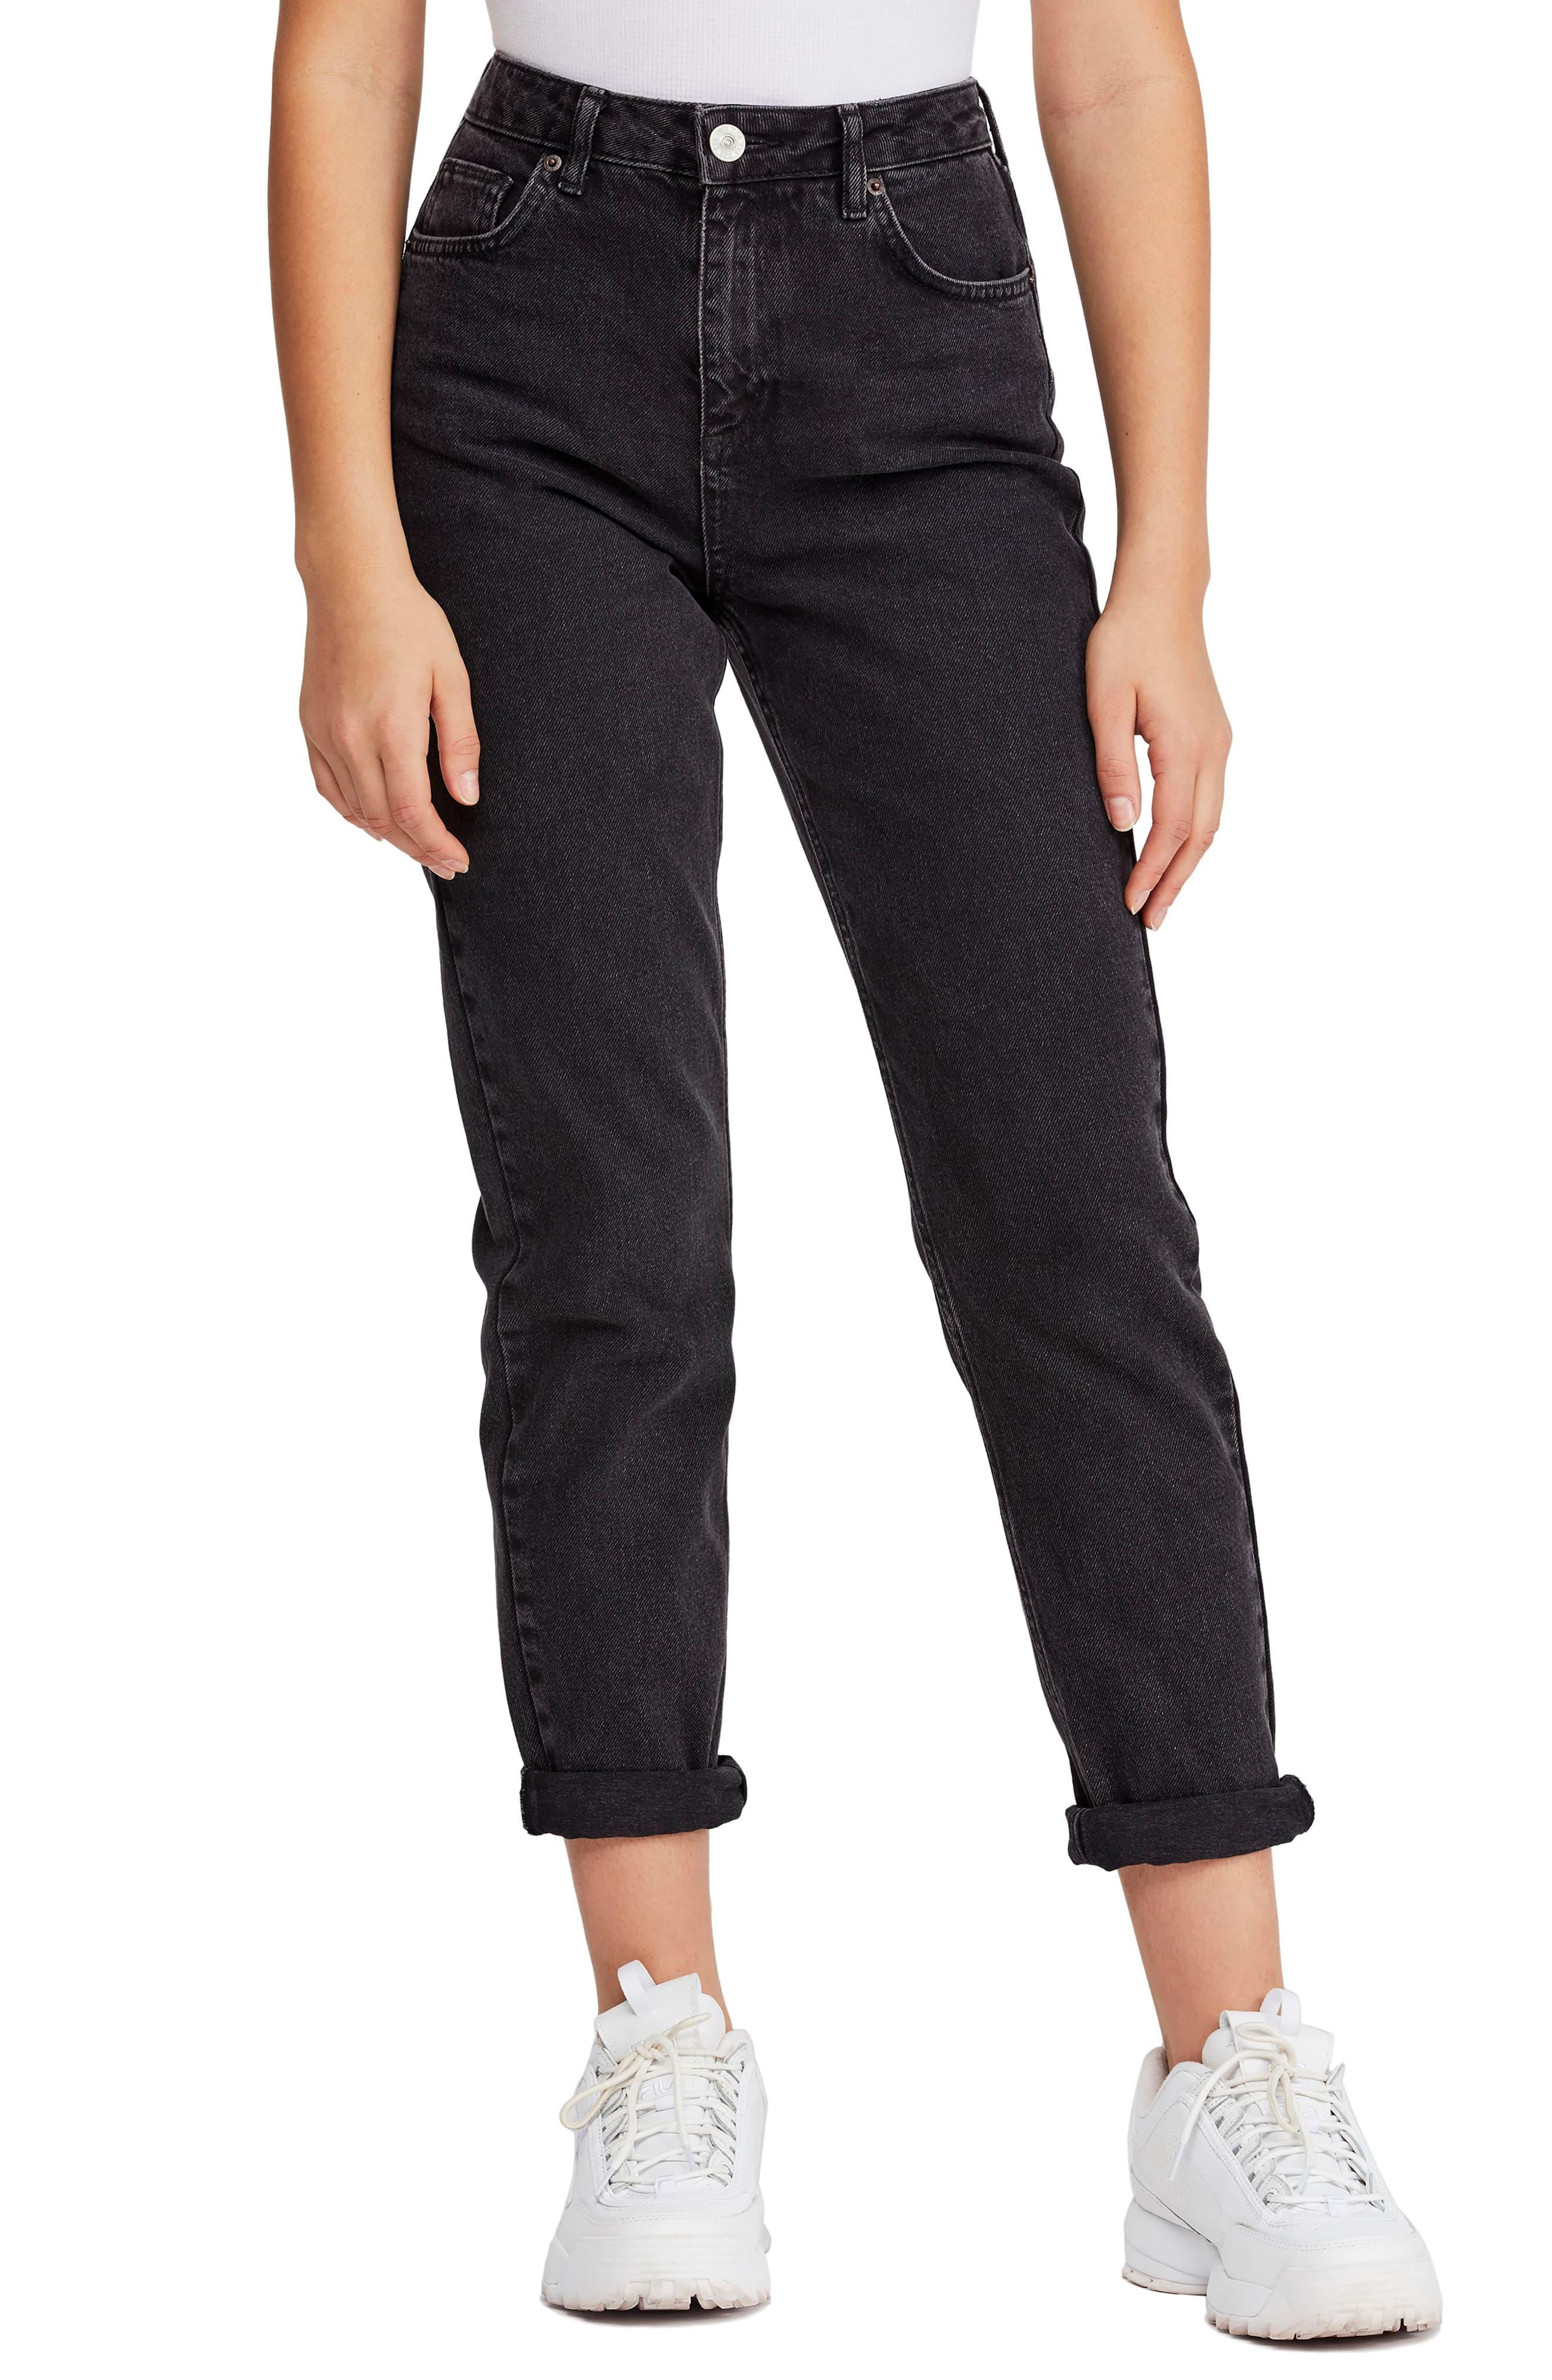 BDG Denim Urban Outfitters Mom Jeans in Carbon (Black) - Lyst